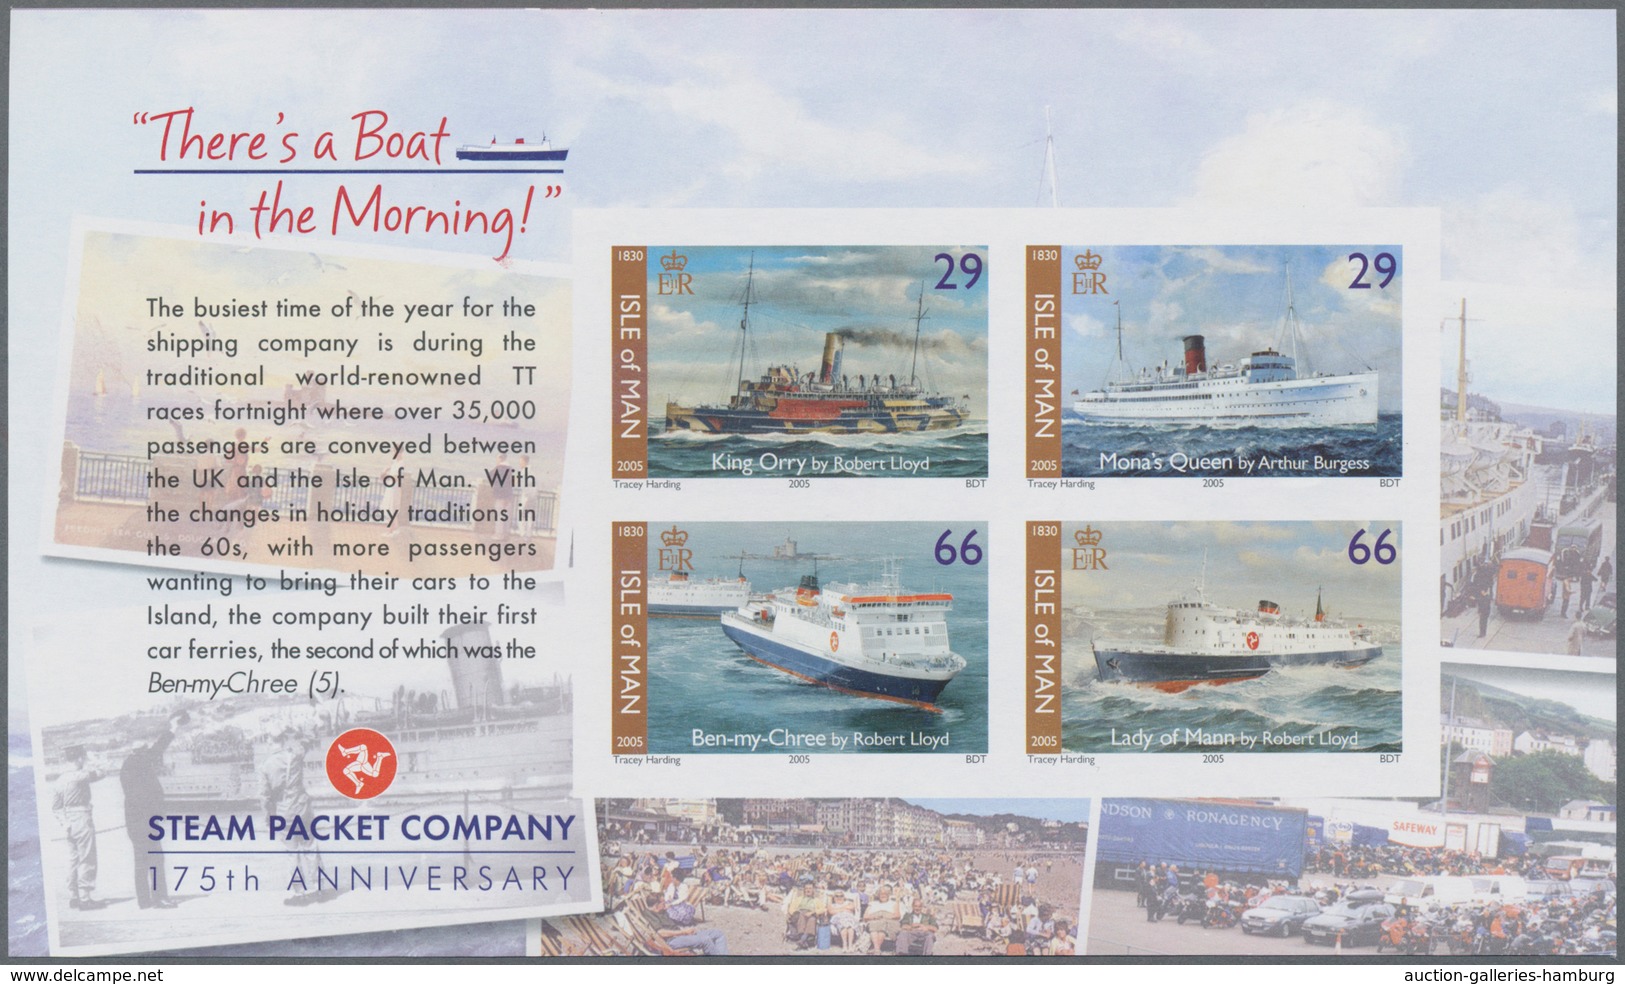 Großbritannien - Isle Of Man: 2005. IMPERFORATE Booklet Pane Michel #85 For The Stamp Booklet Michel - Man (Insel)